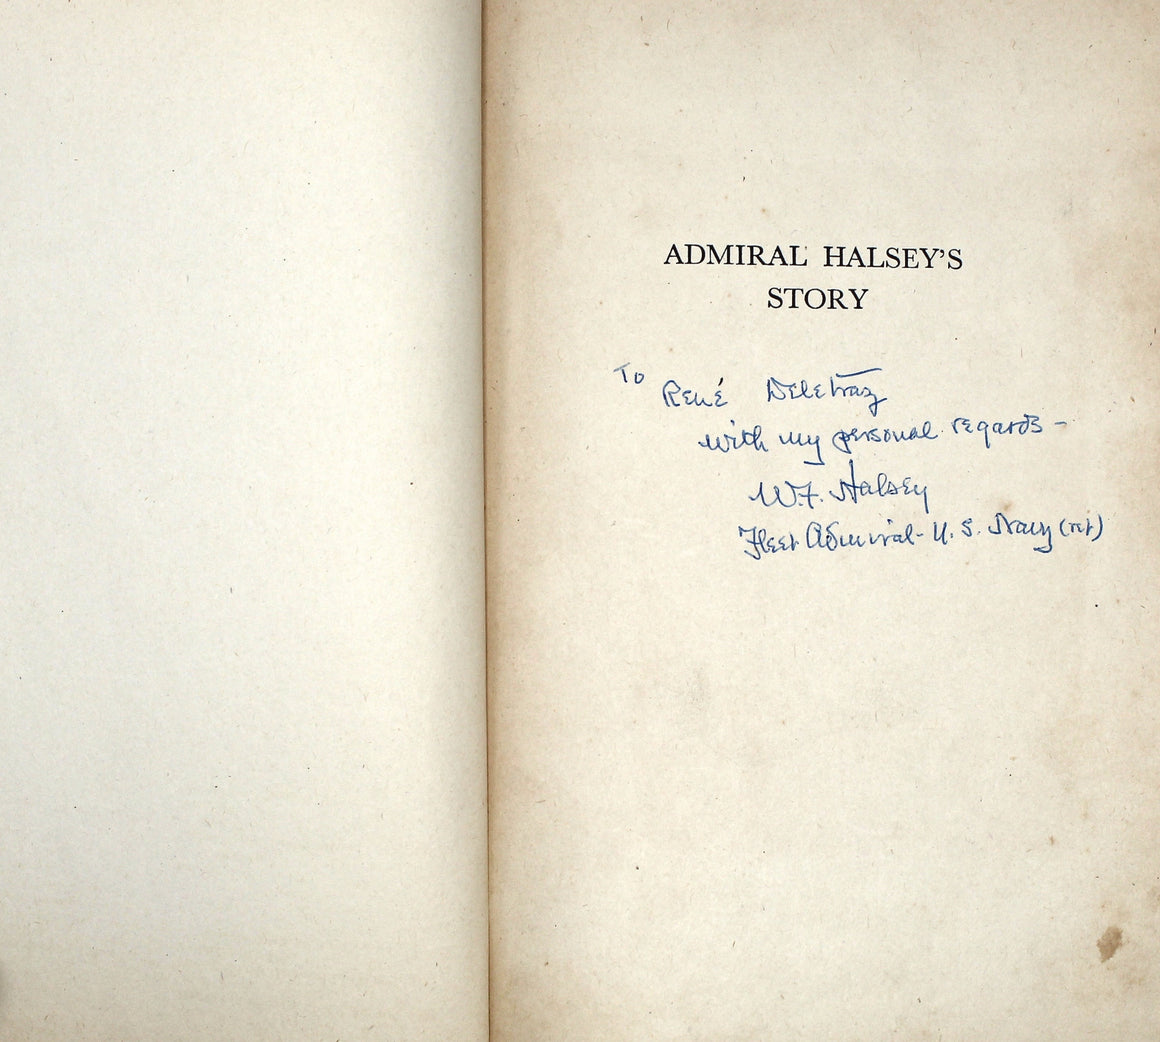 Admiral Halsey's Story by William F. Halsey and J. Bryan, Signed and Inscribed First Edition, 1947